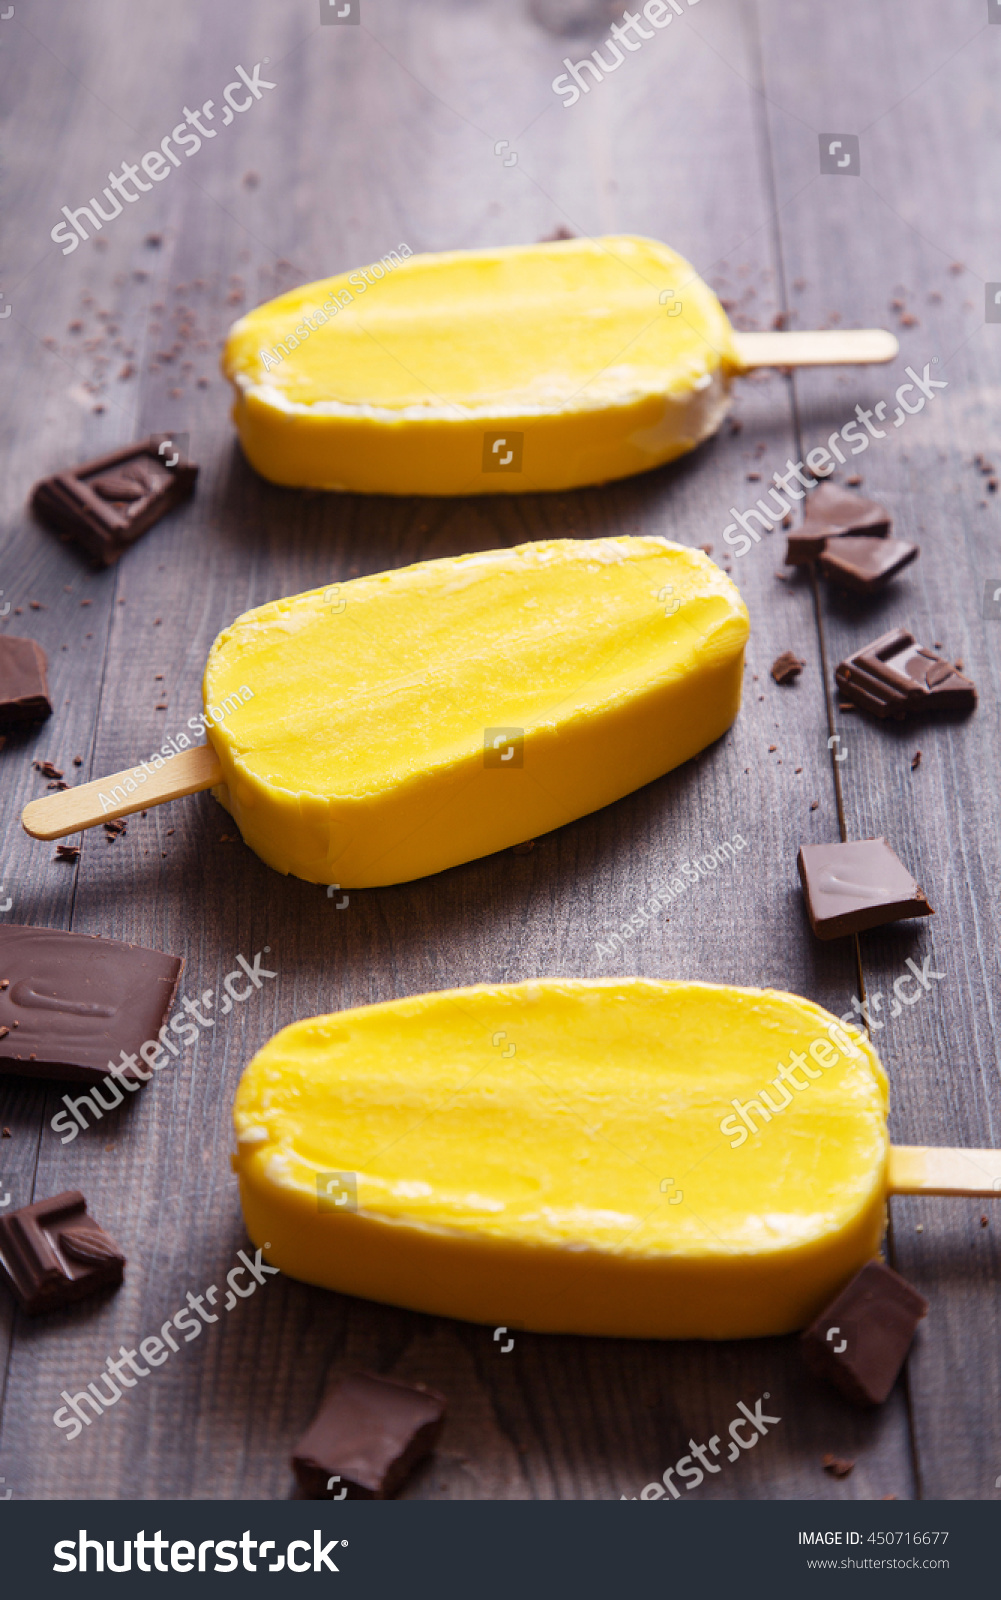 Download Yellow Ice Cream Chocolate Bars Crumbs Food And Drink Stock Image 450716677 PSD Mockup Templates